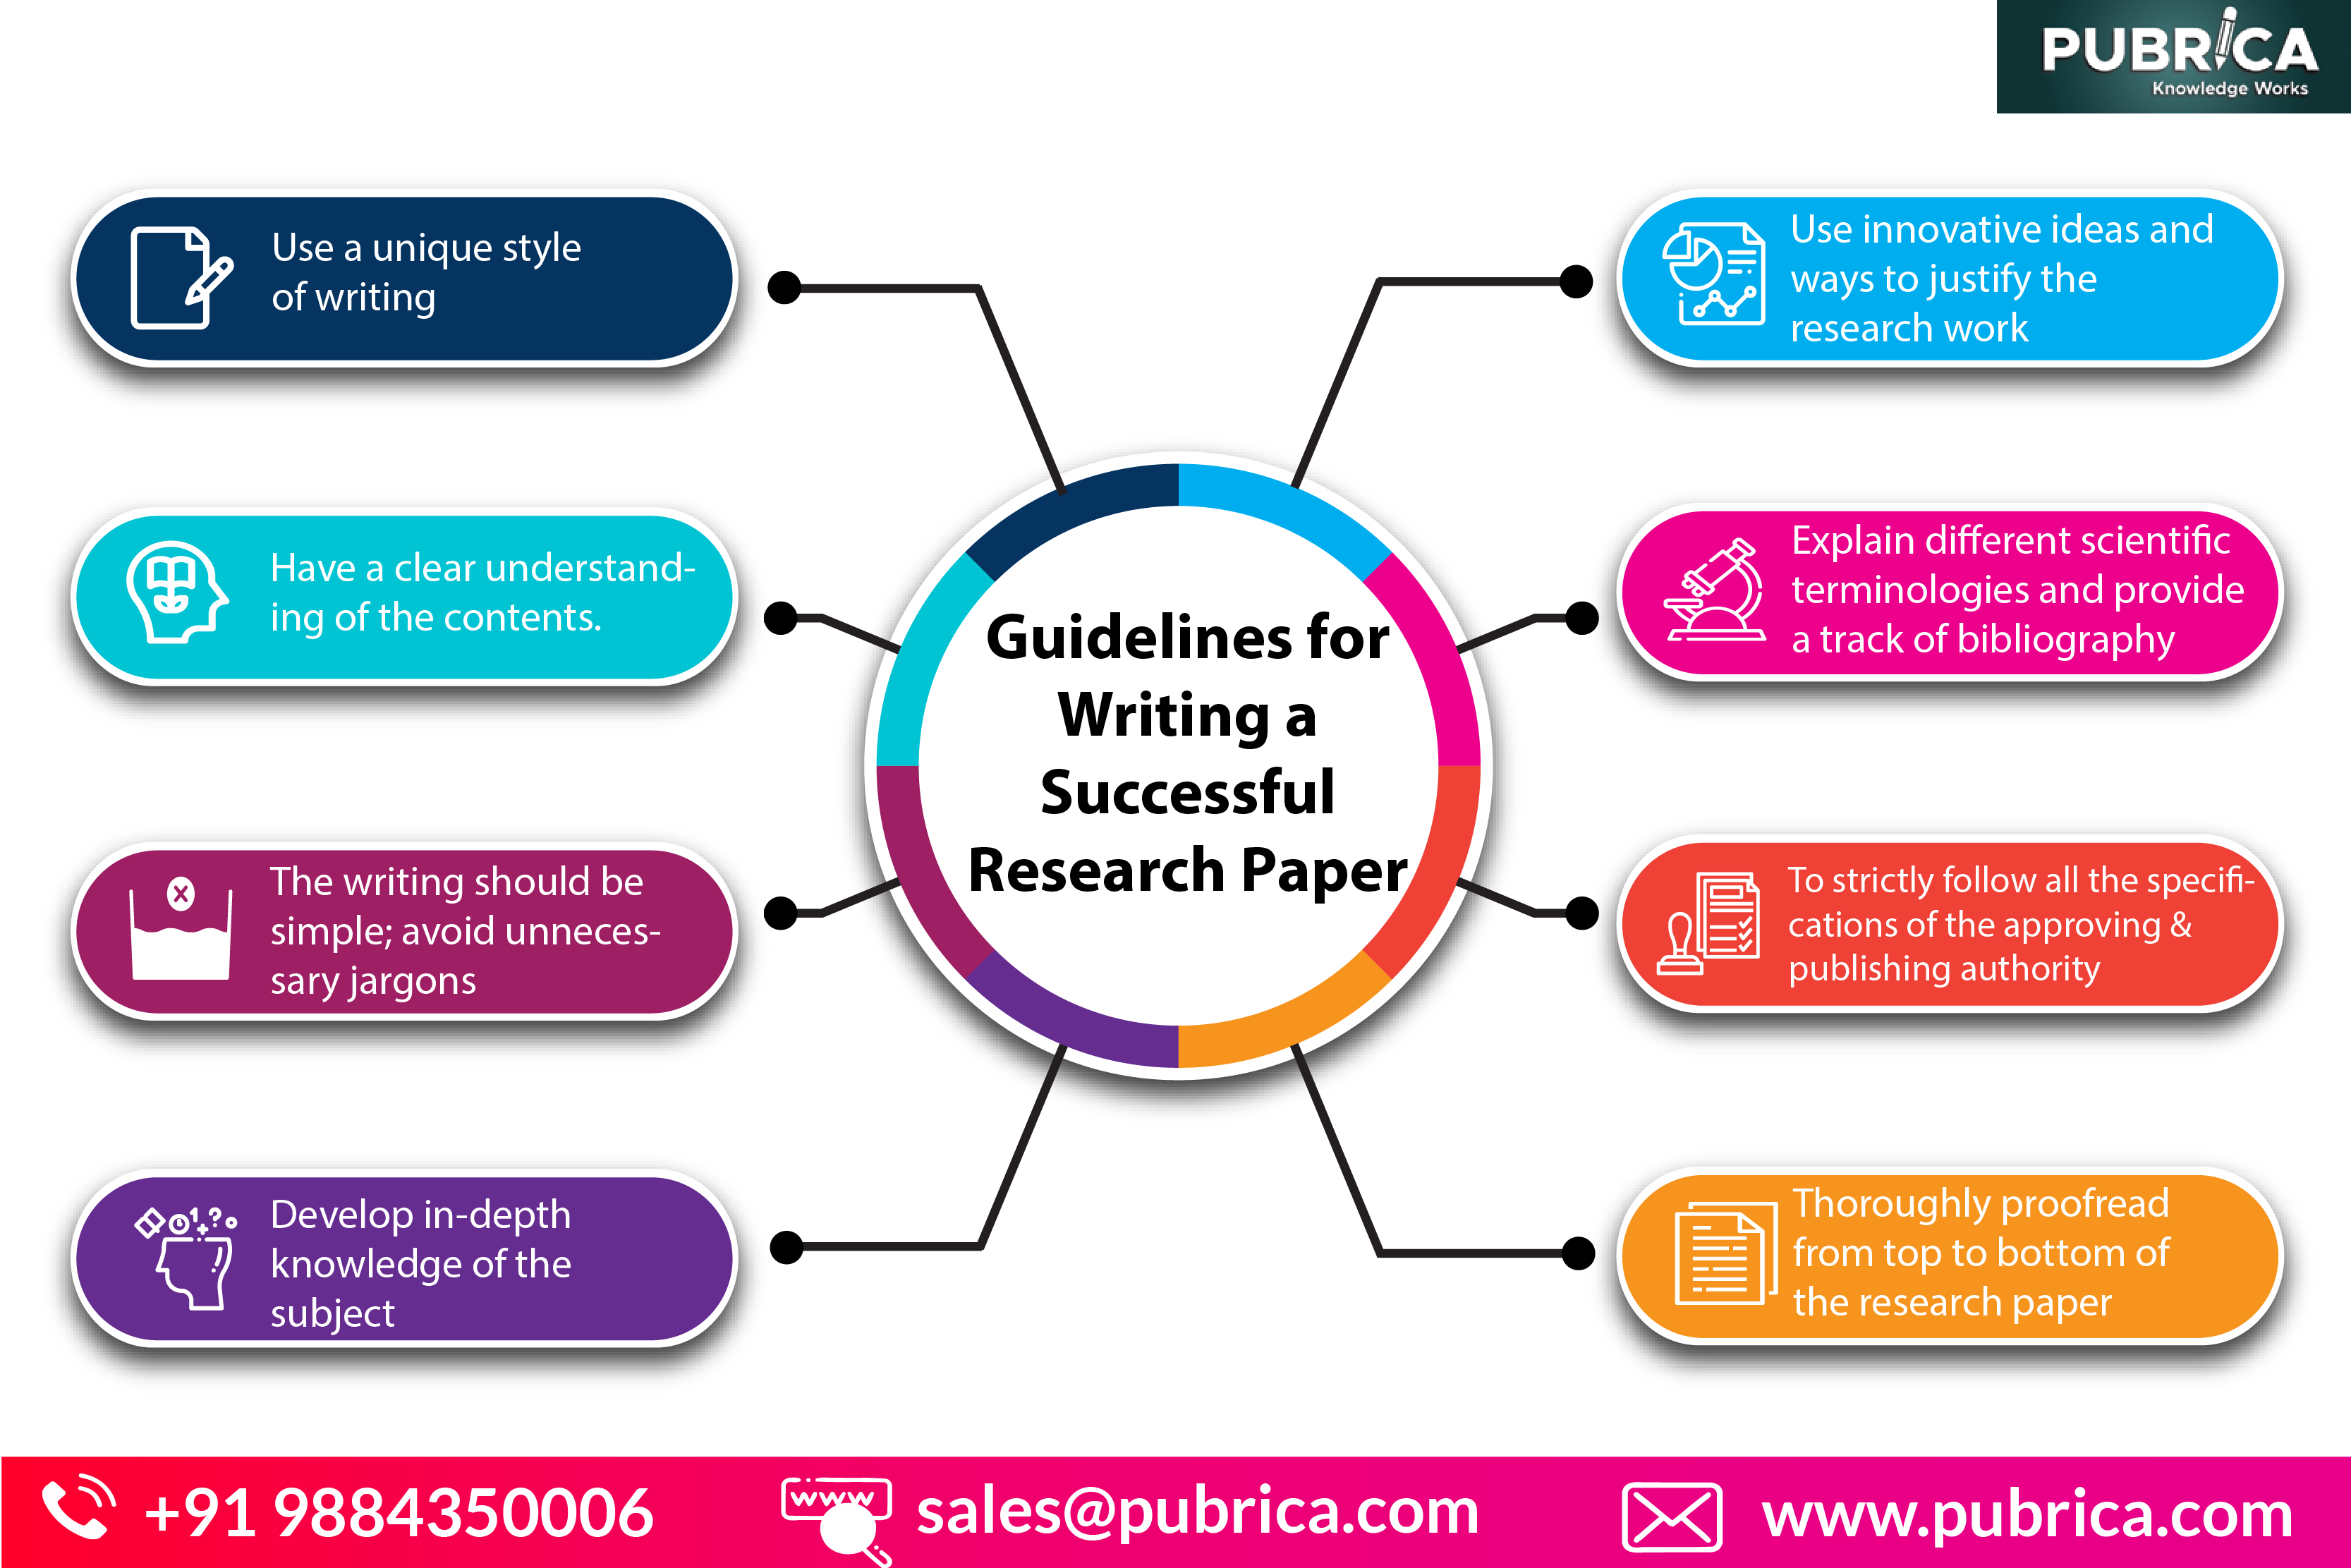 Guidelines content. How to write a research paper. How to write research. Writing research papers. Types of Scientific research.